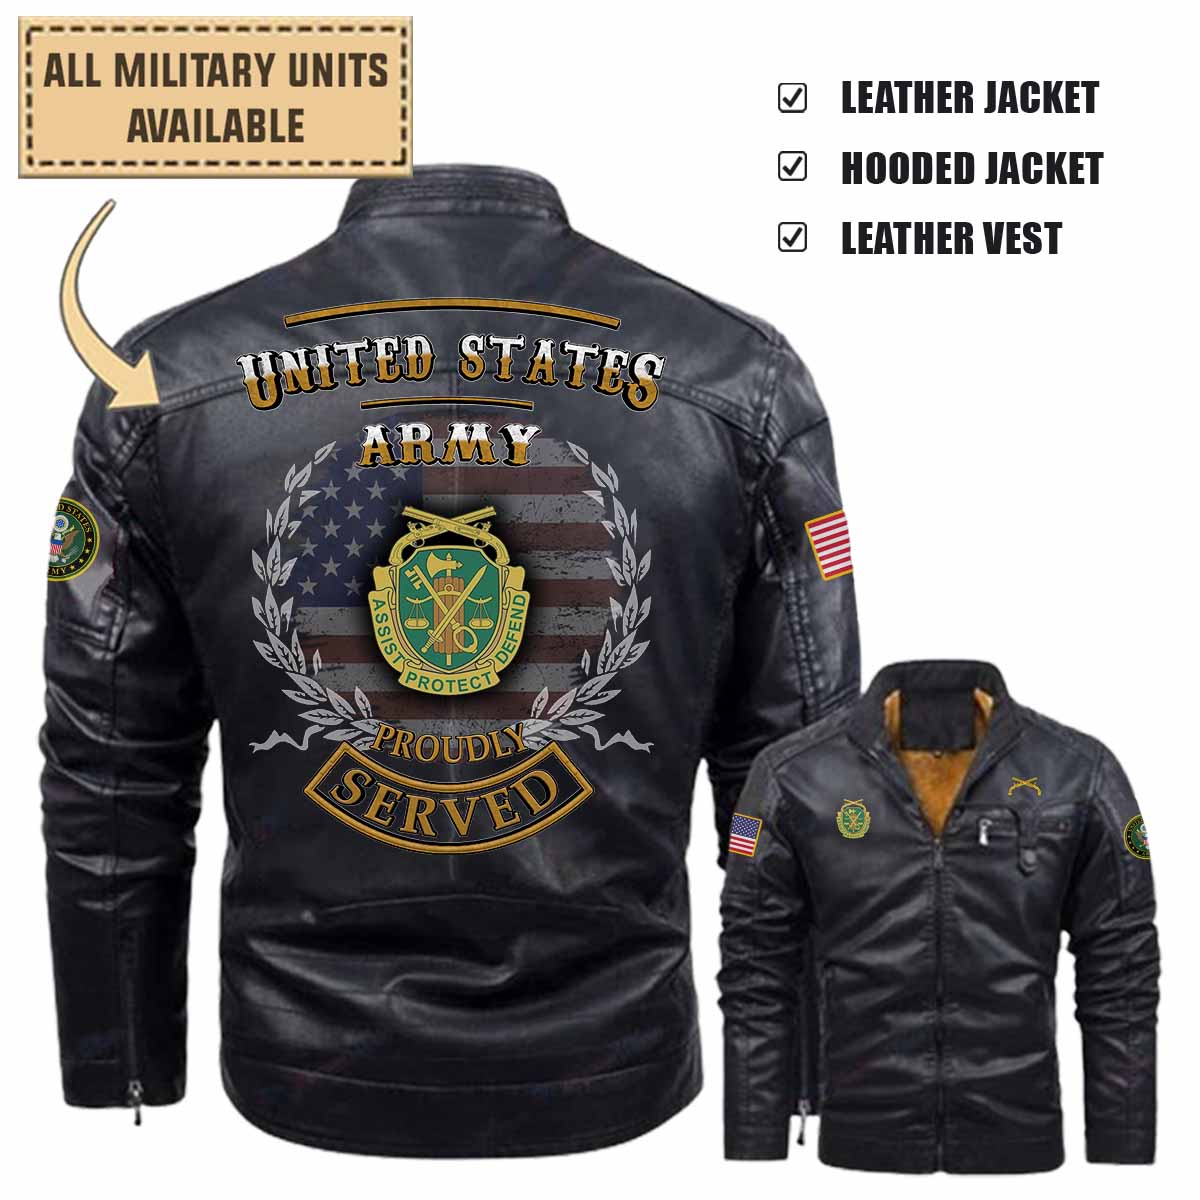 533rd MP CO 533rd Military Police Company_Military Leather Jacket and Vest